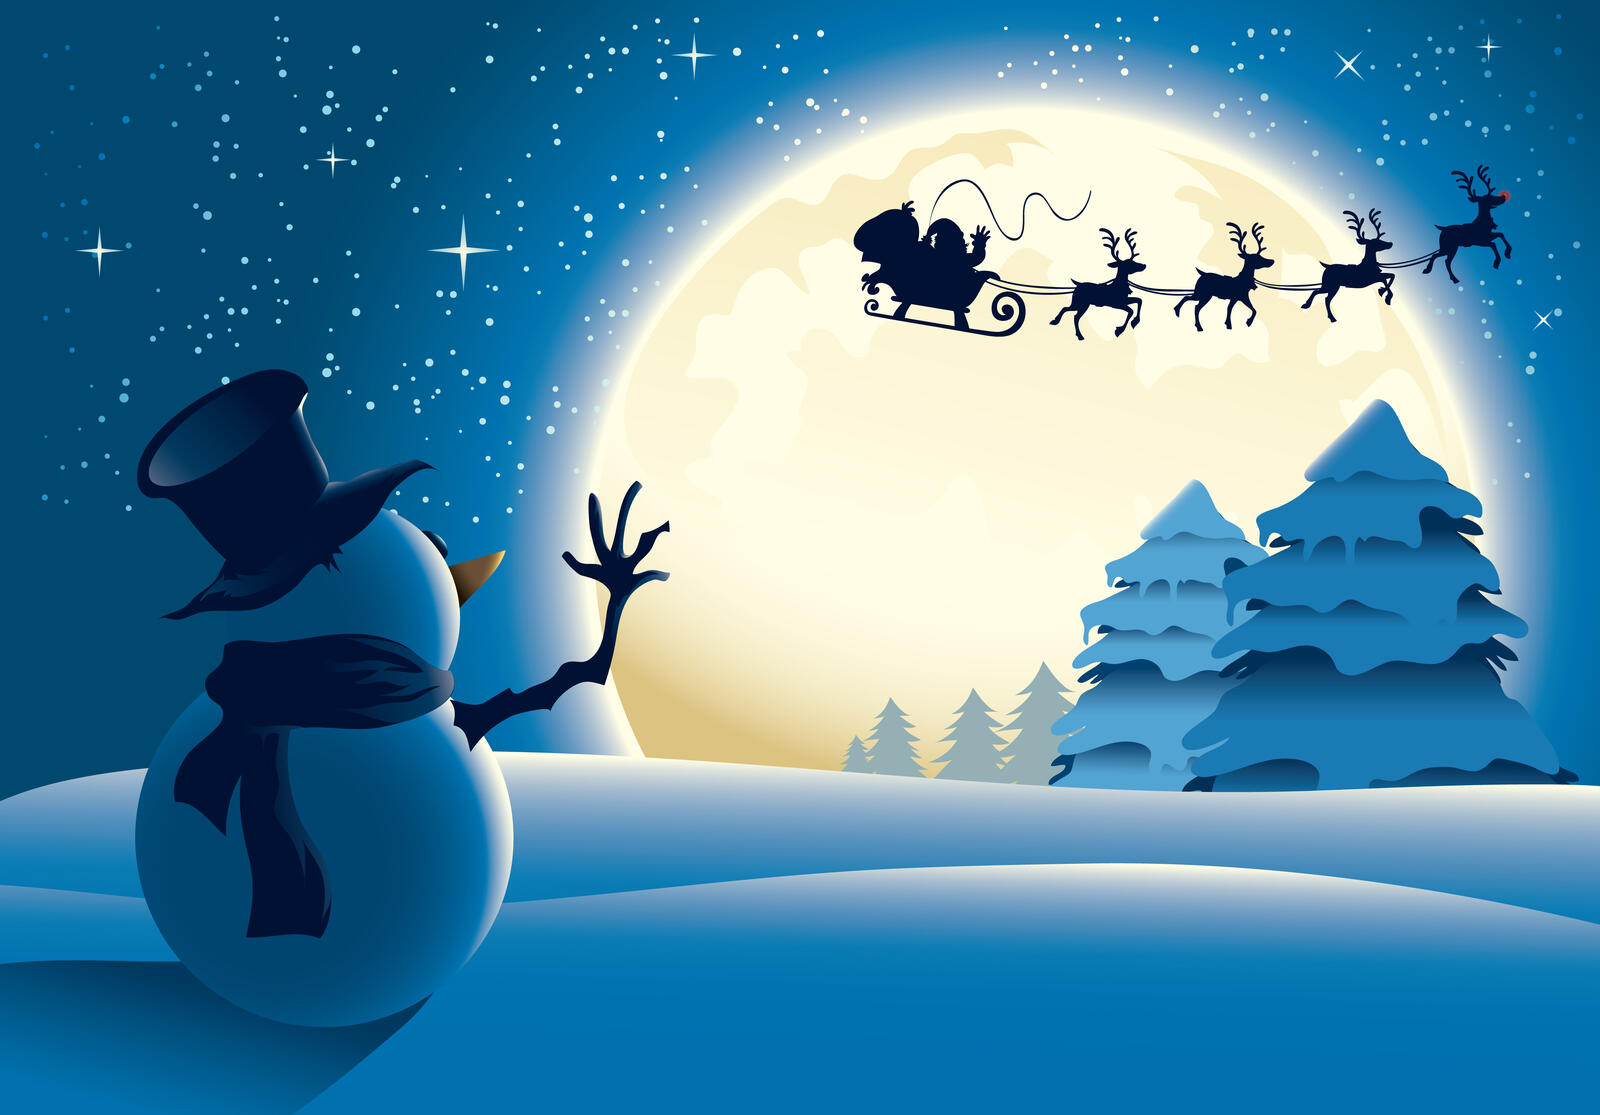 Wallpapers snowman New Year s style Christmas on the desktop